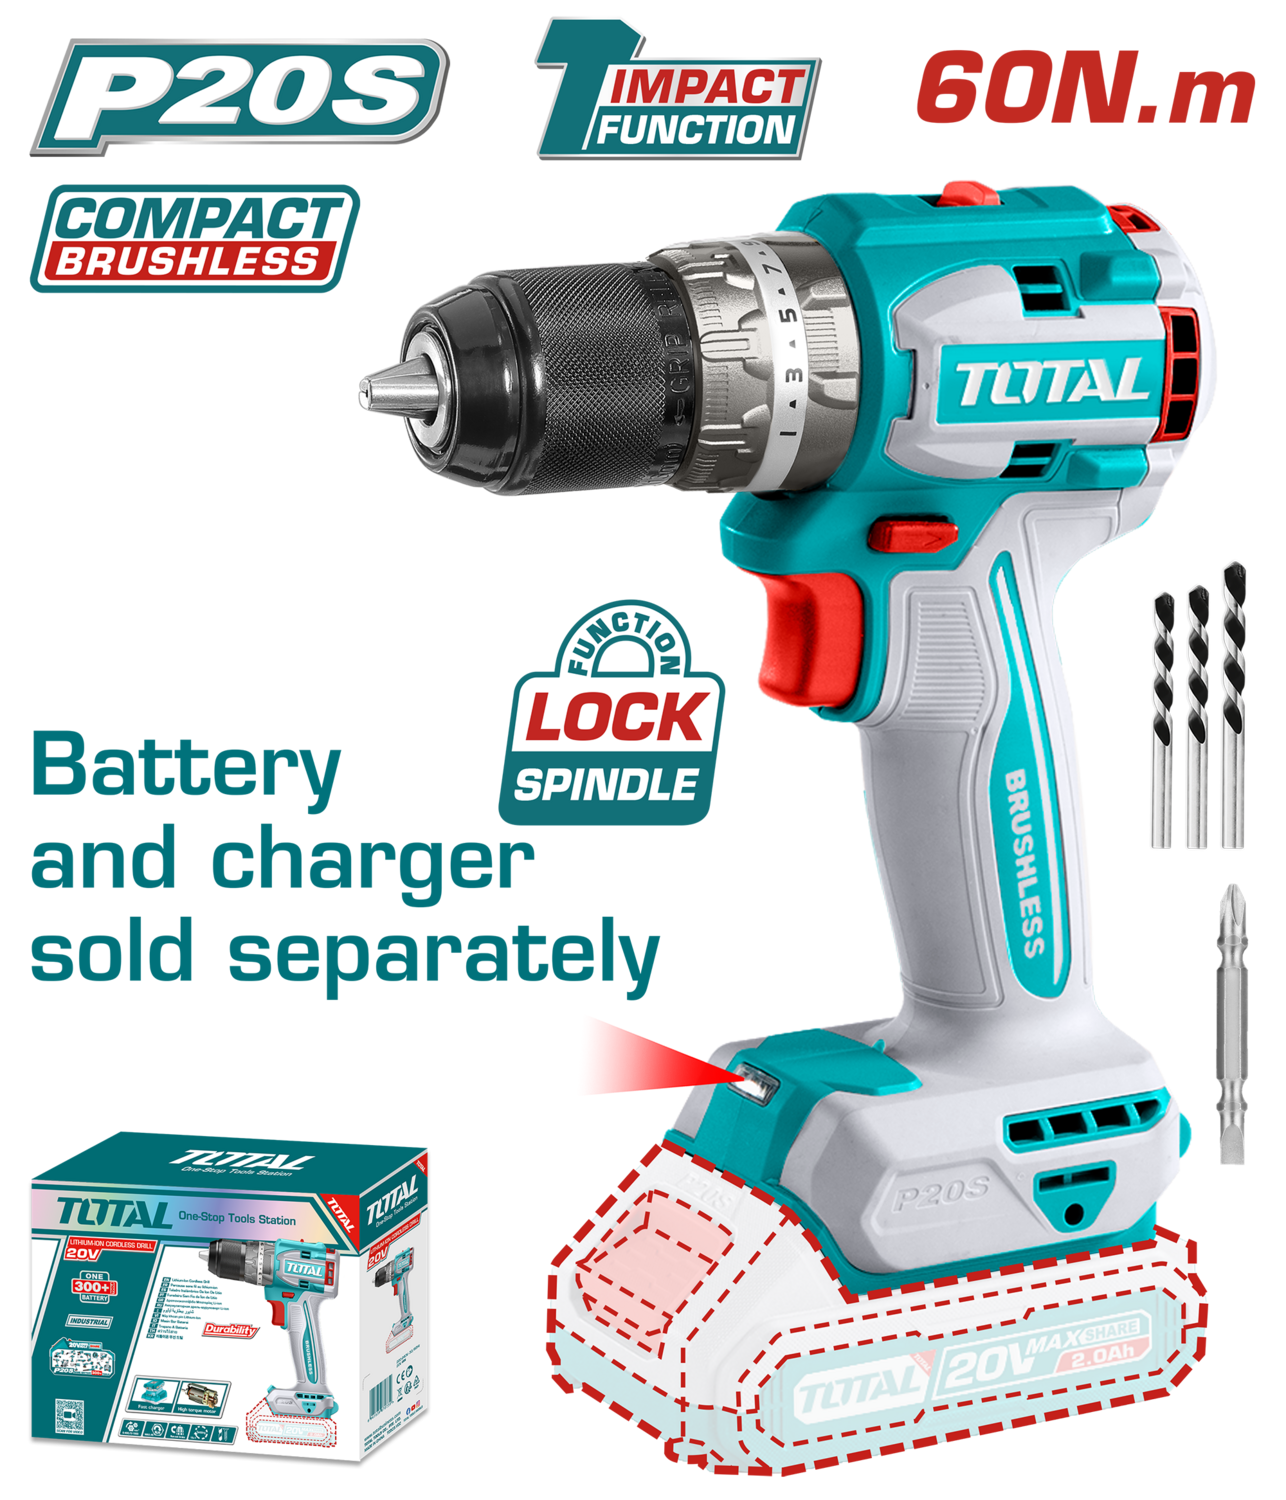 Total 20v Lithium-Ion Compact Brushless Impact Drill- TIDLI206021